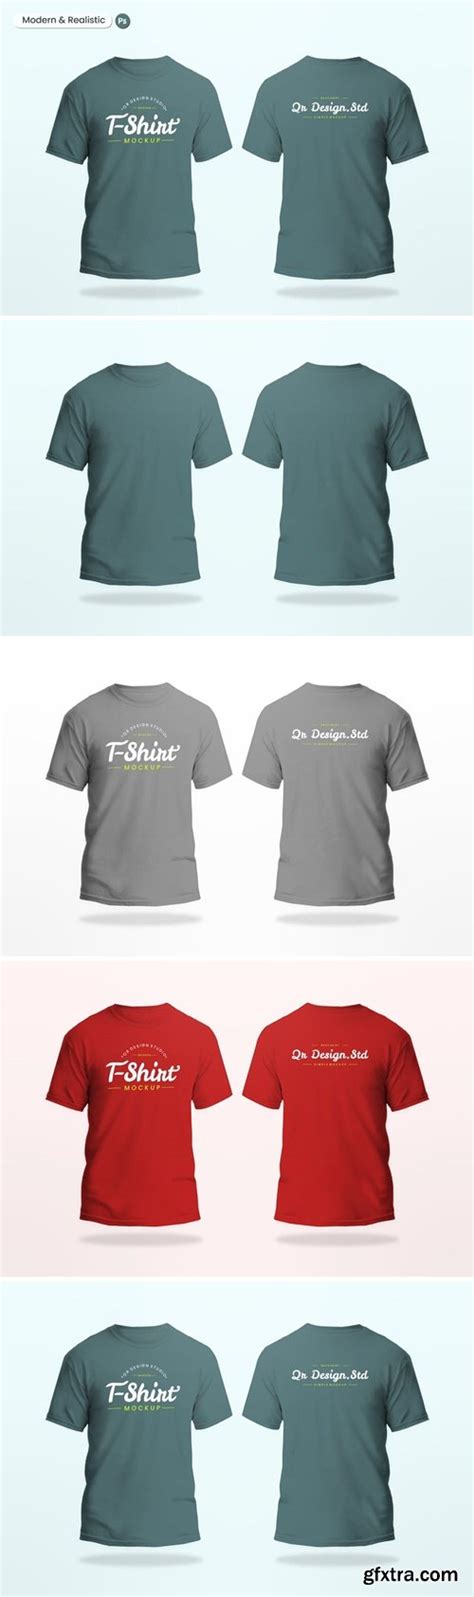 Front And Back T Shirt Mockup Jrcy49f Gfxtra